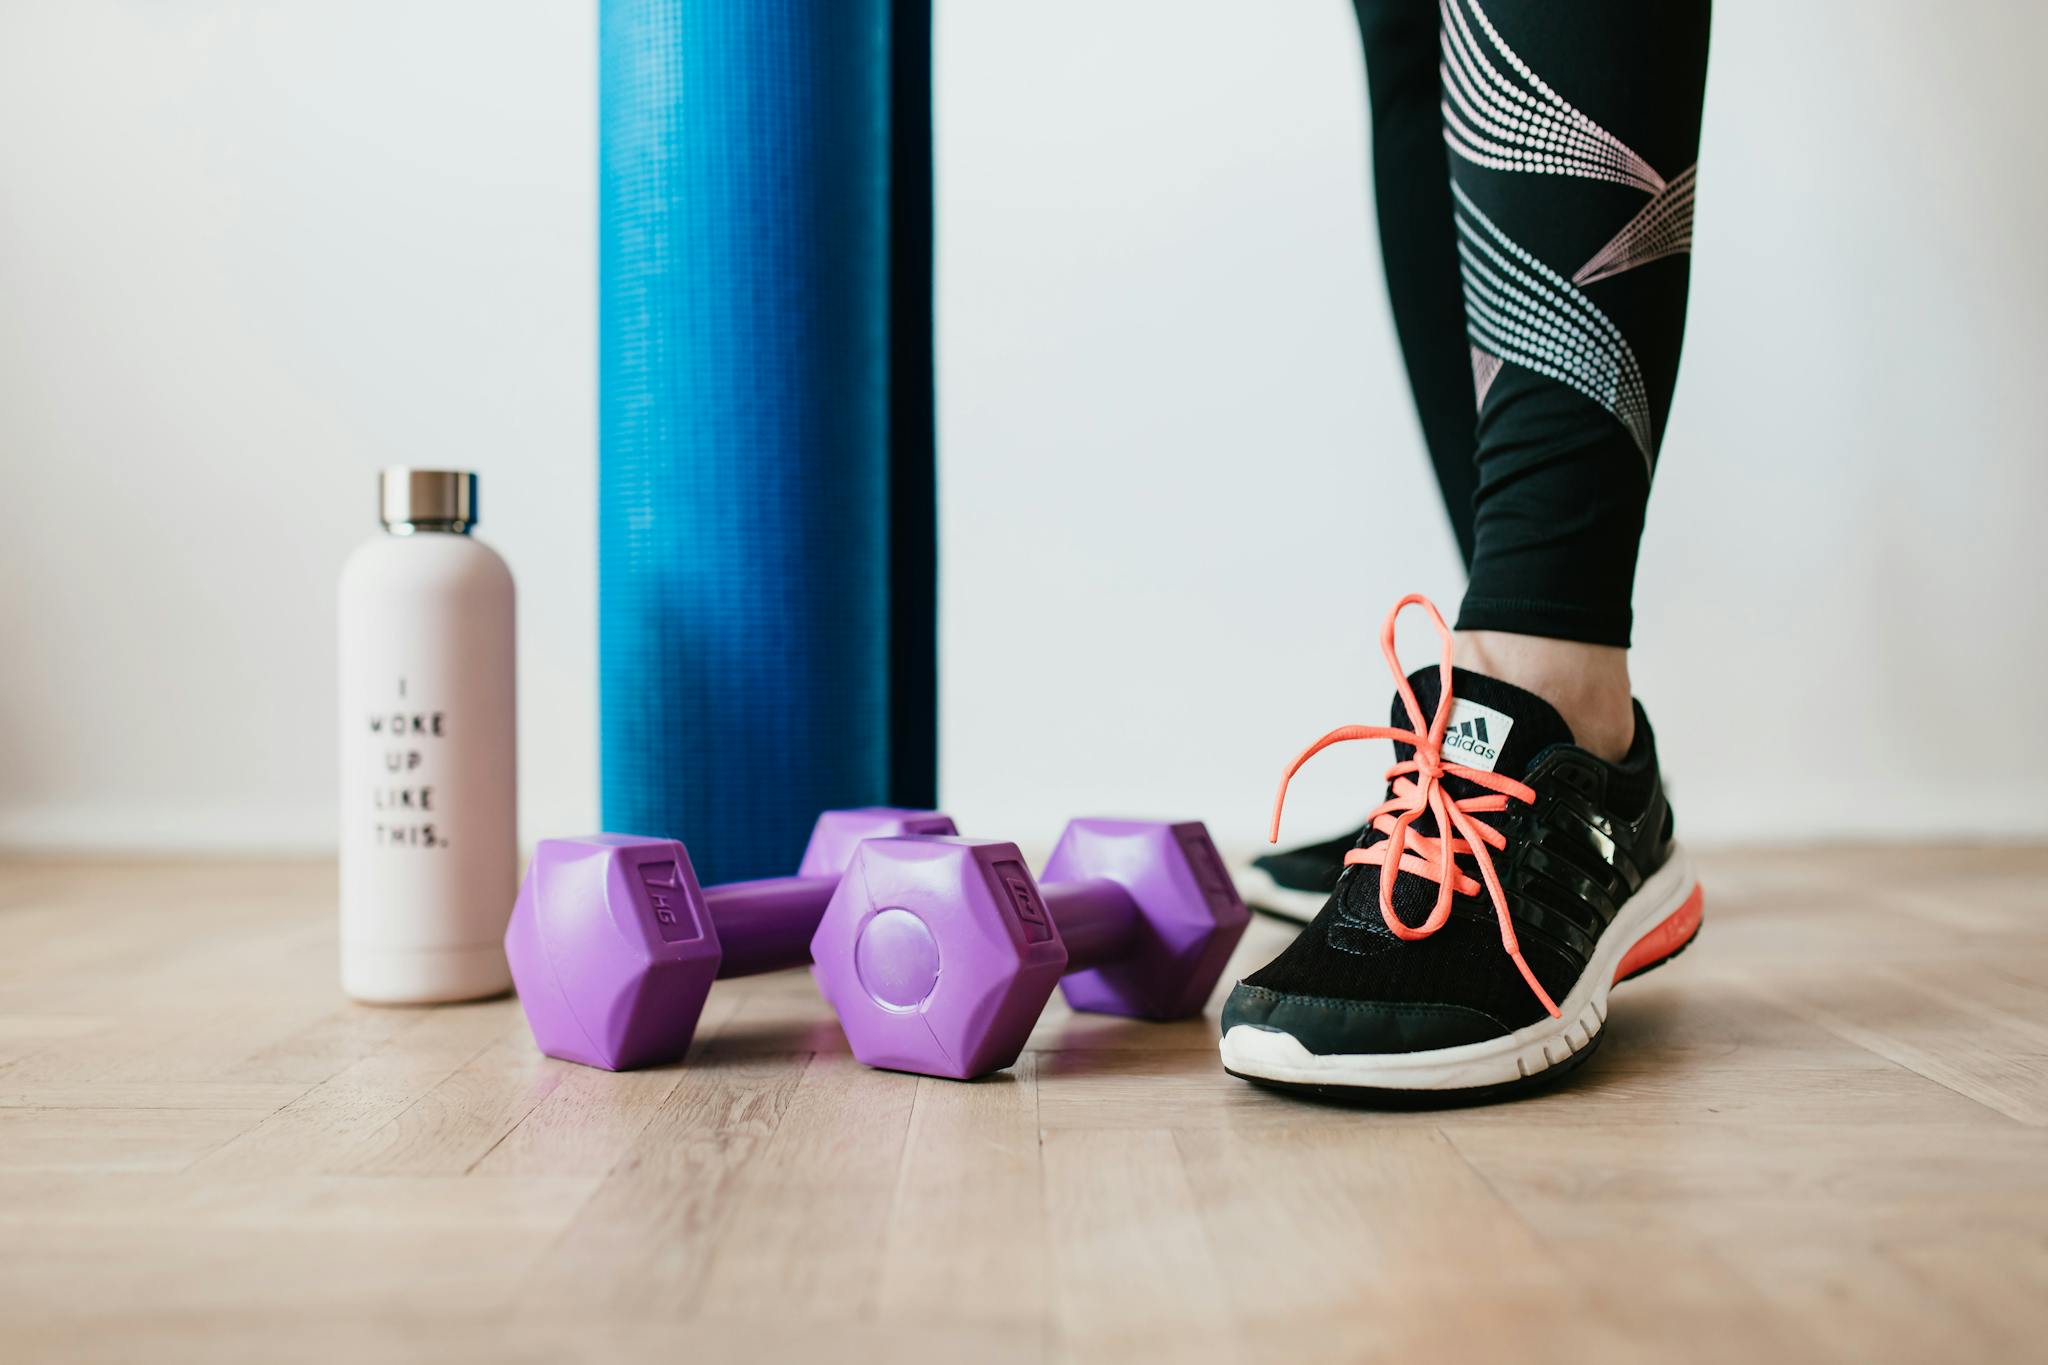 Crop sportswoman wearing sneakers and black leggings standing with sport mat on wooden floor near dumbbells and water bottle before exercising indoors